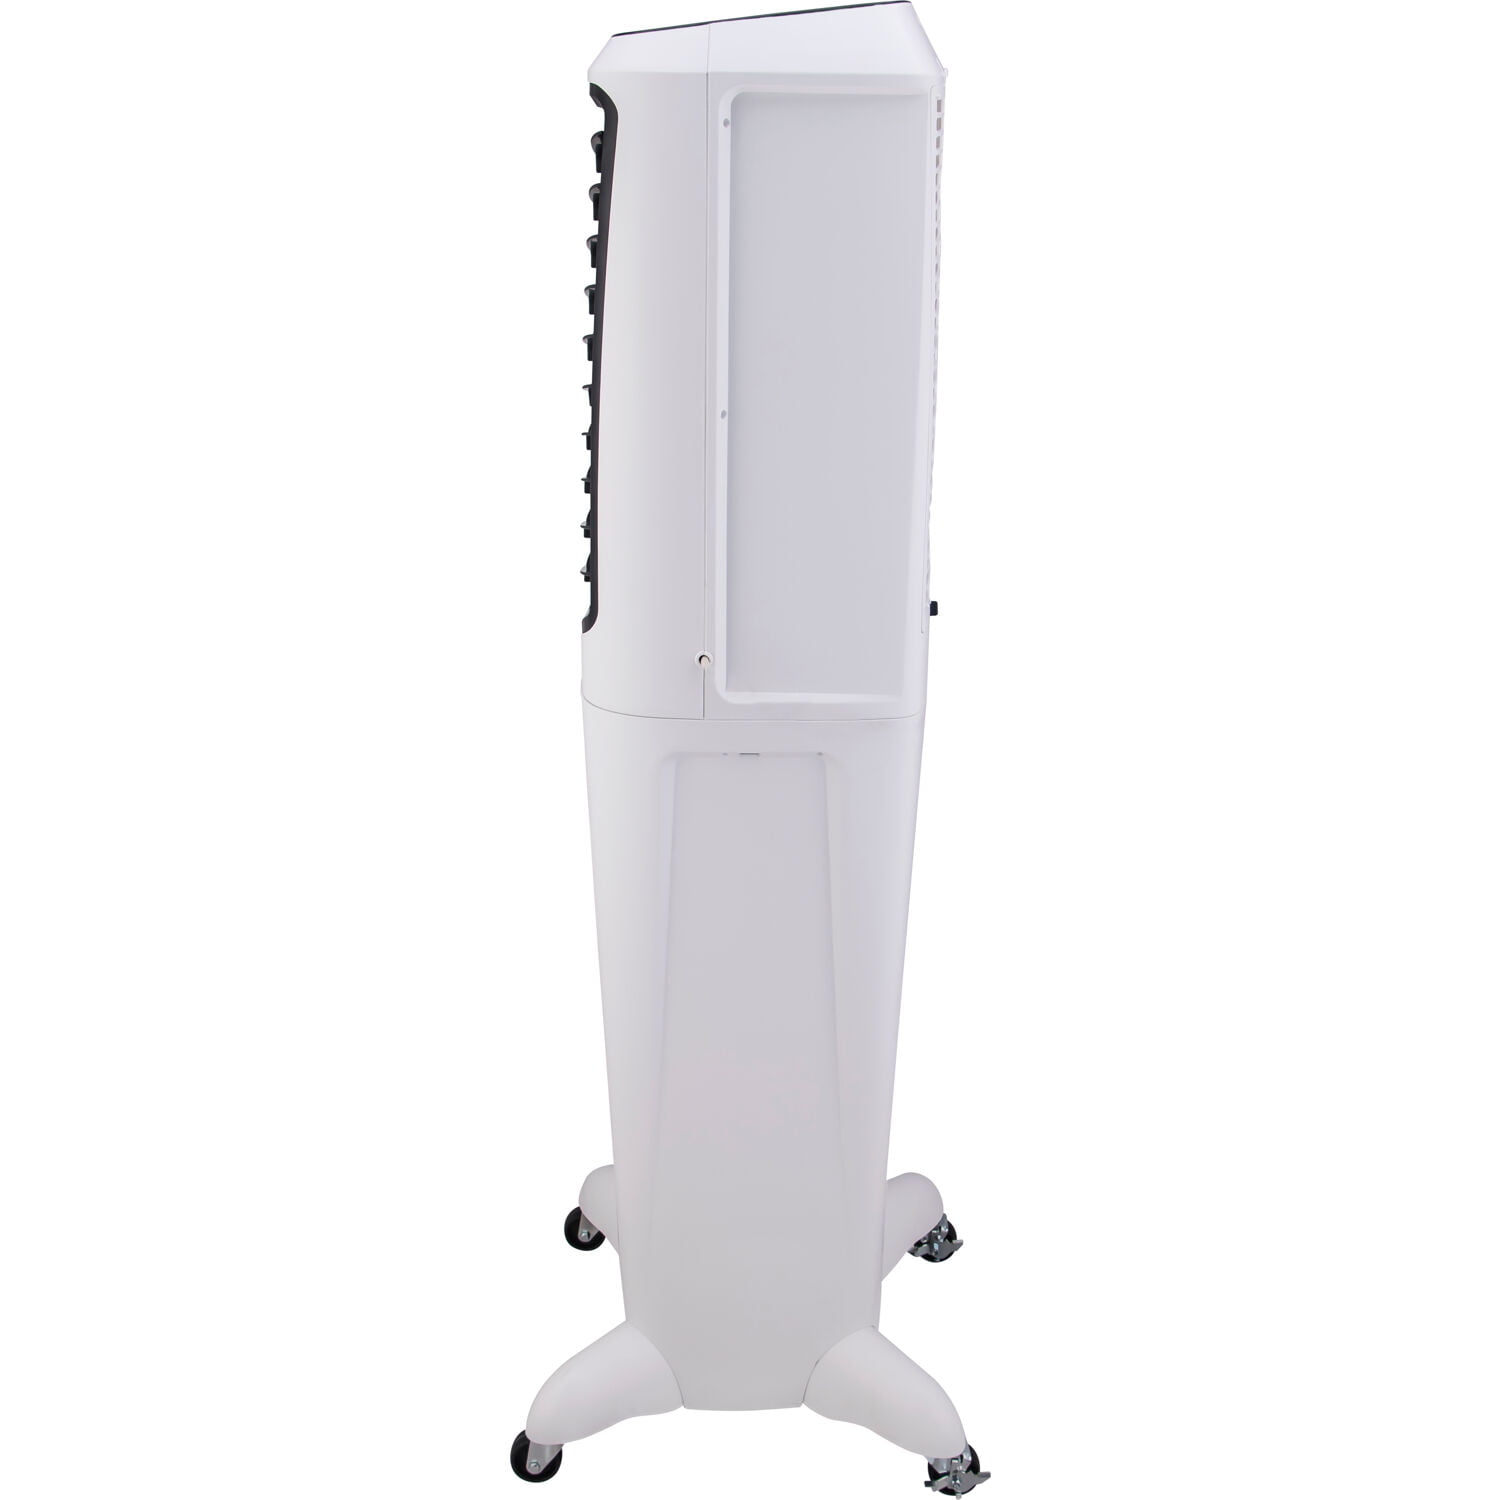 White Honeywell 588-647 CFM Portable Evaporative Tower Cooler with Fan 53.6 TC50PEU Humidifier /& Remote